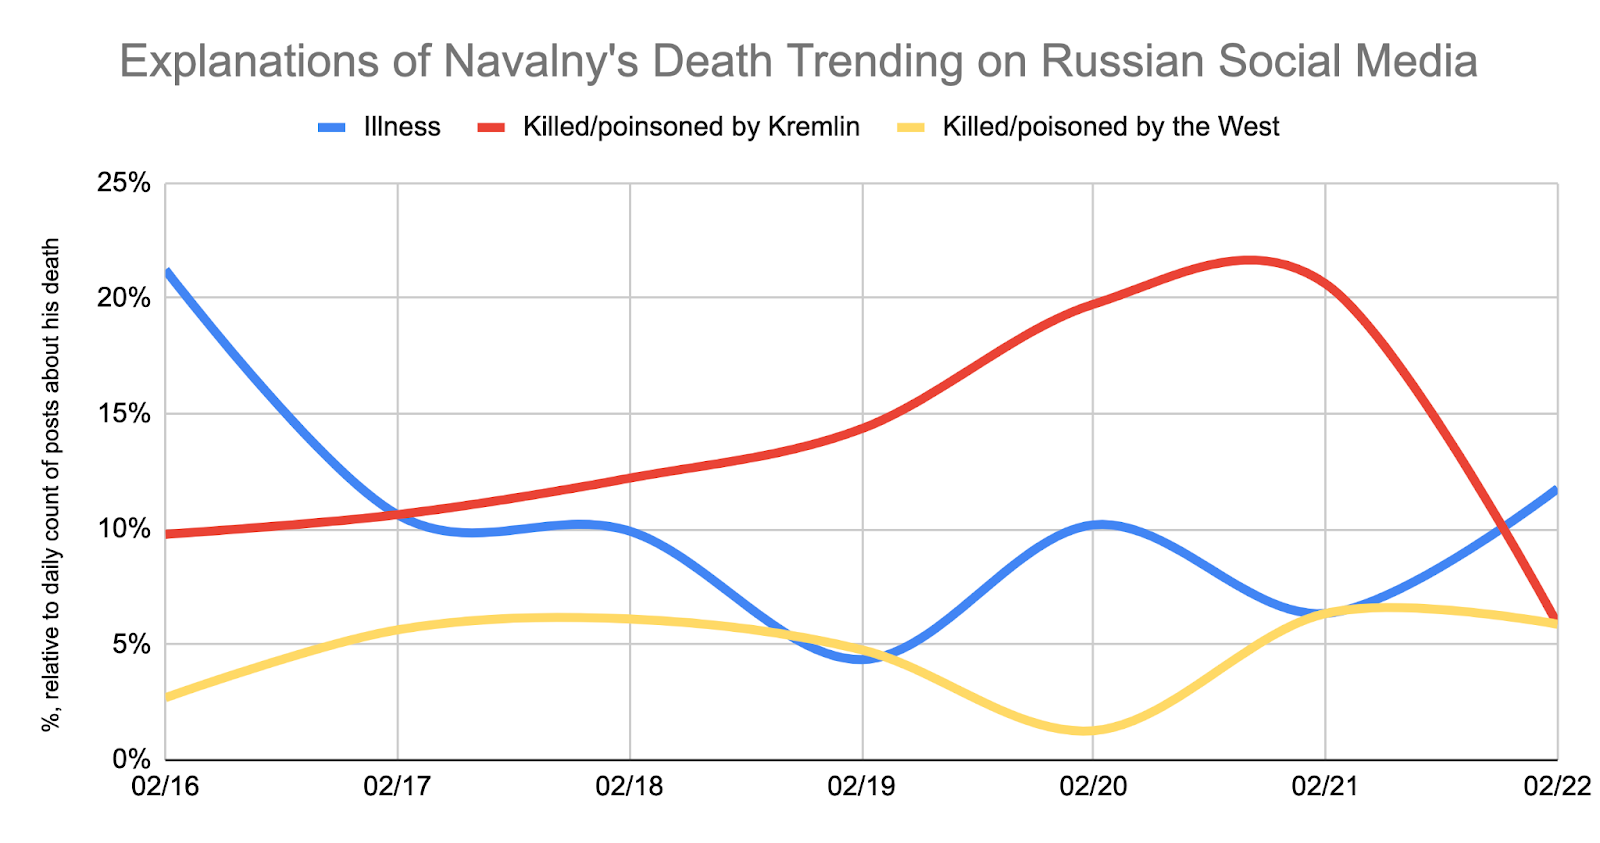 What are Russians Saying About the Death of Navalny?